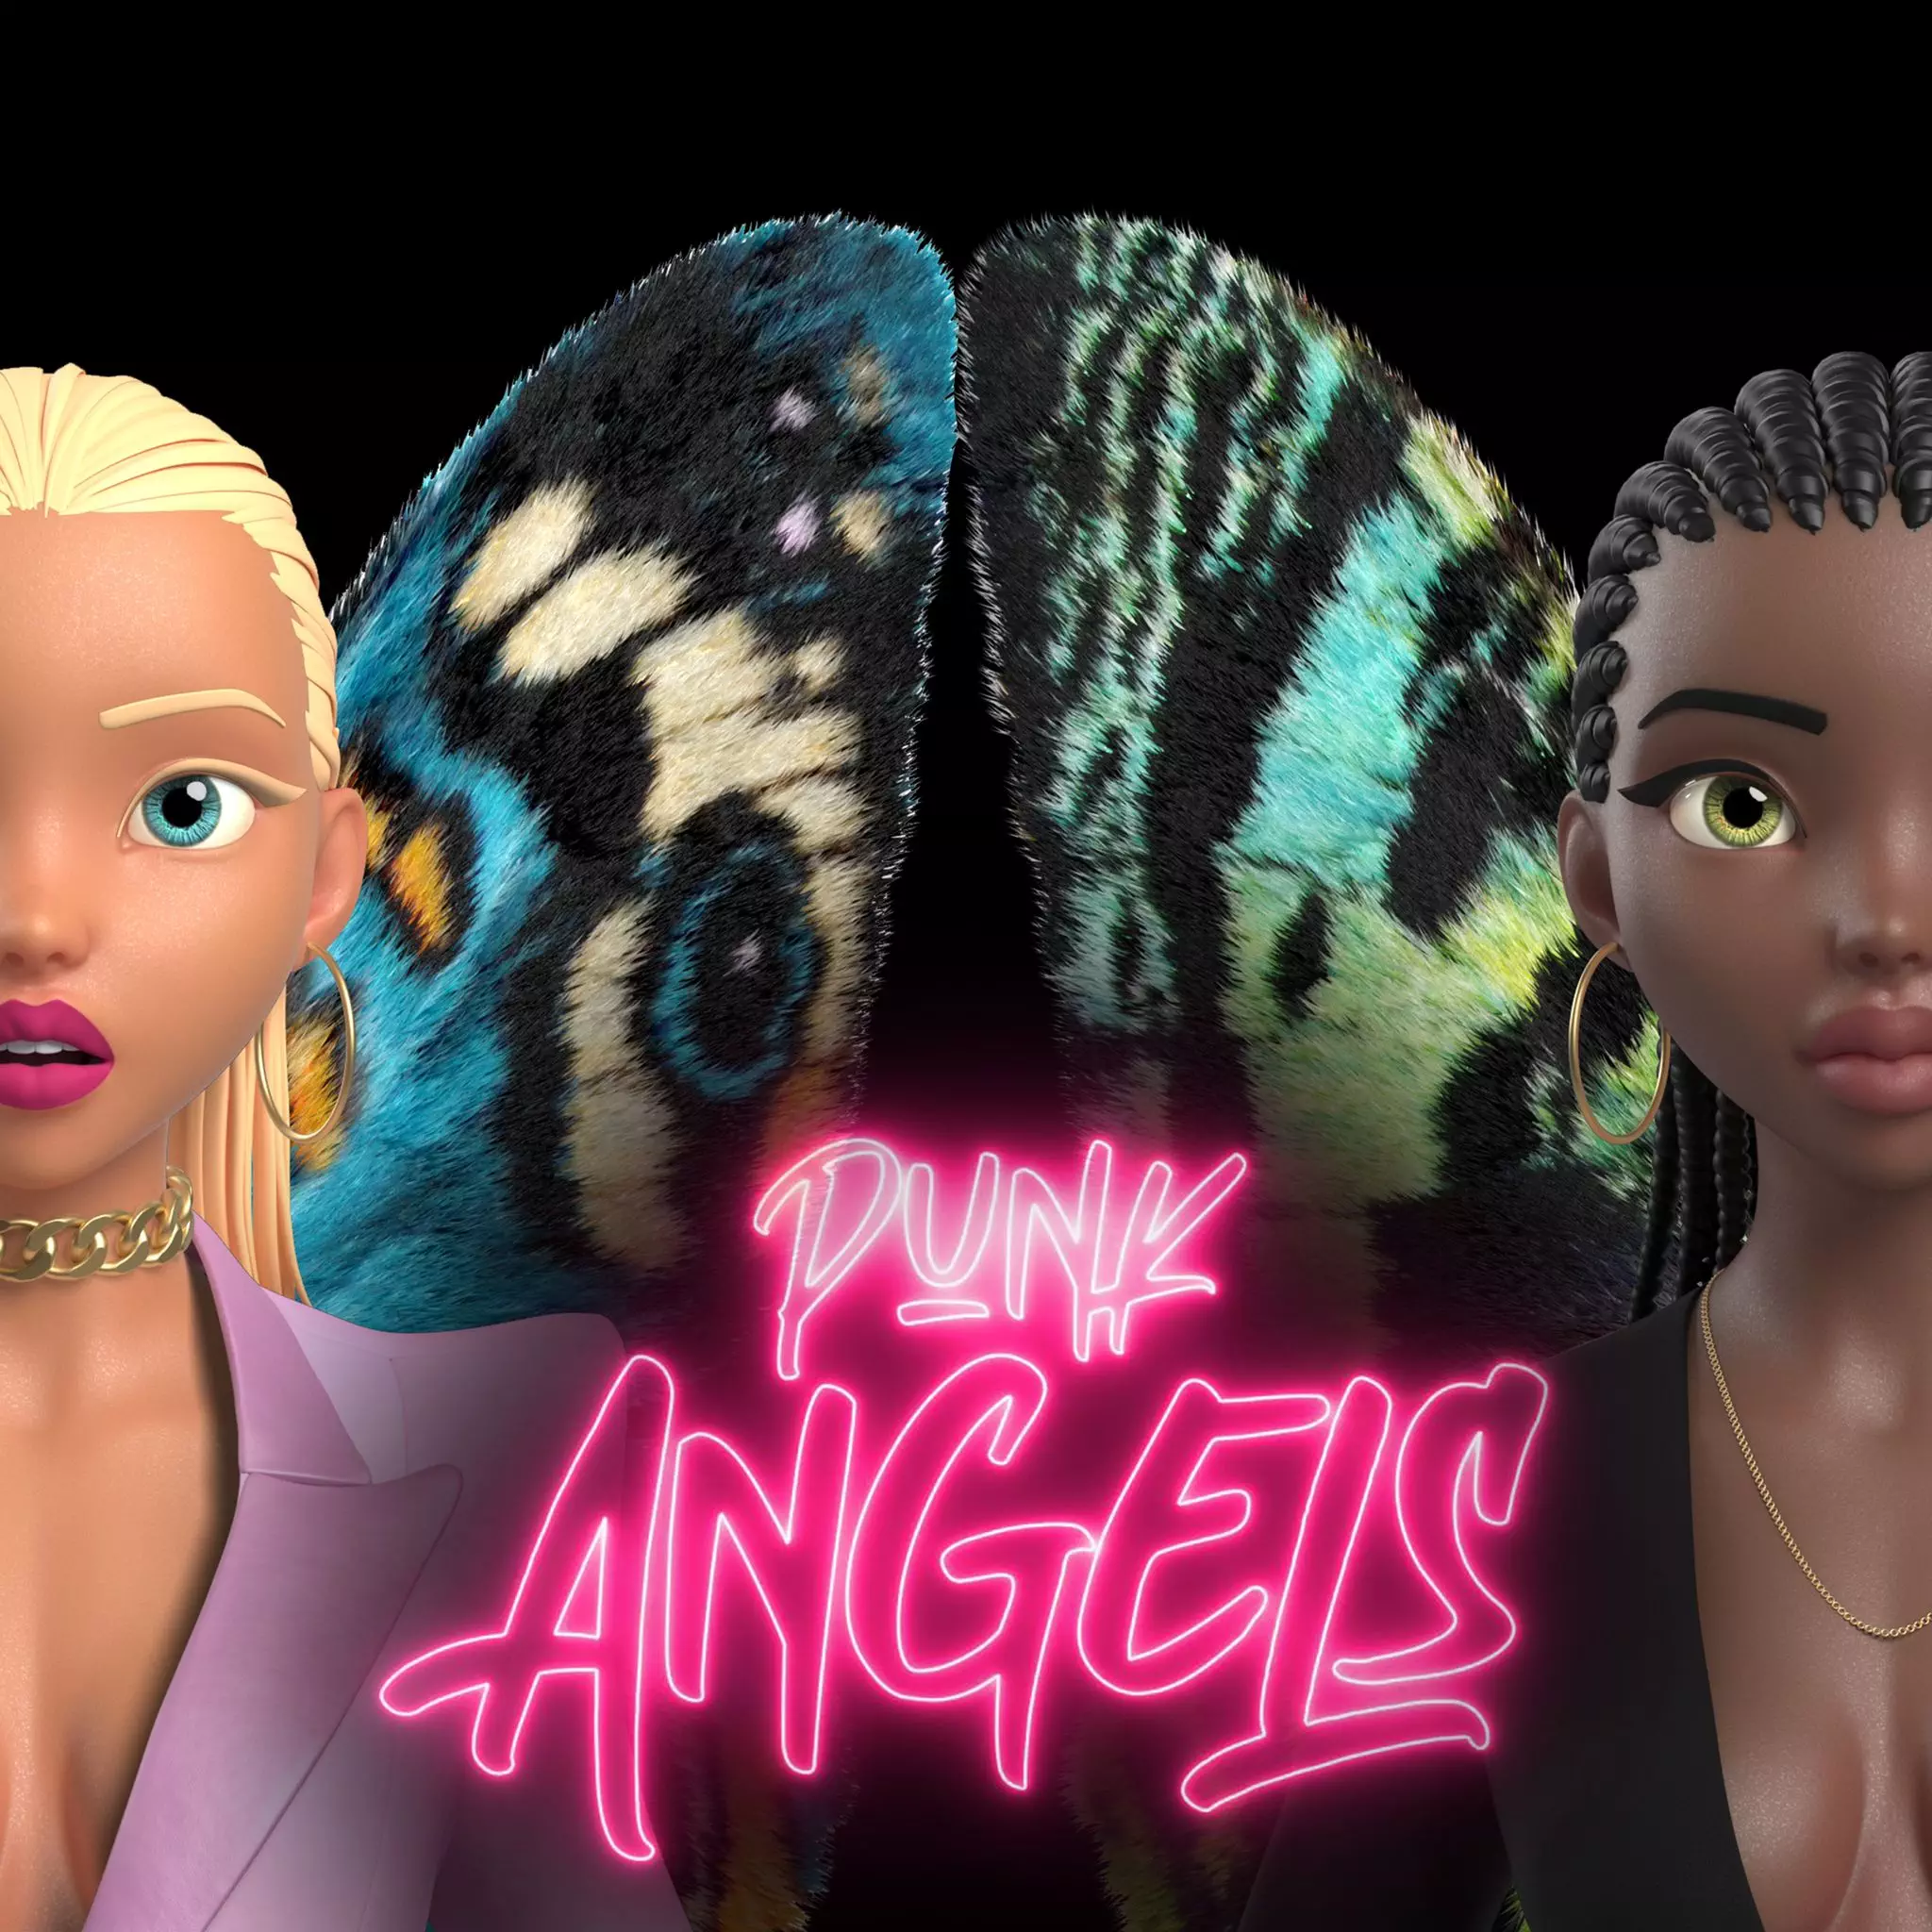 Two female NFTs with butterfly wings in the Punk Angels NFT collection